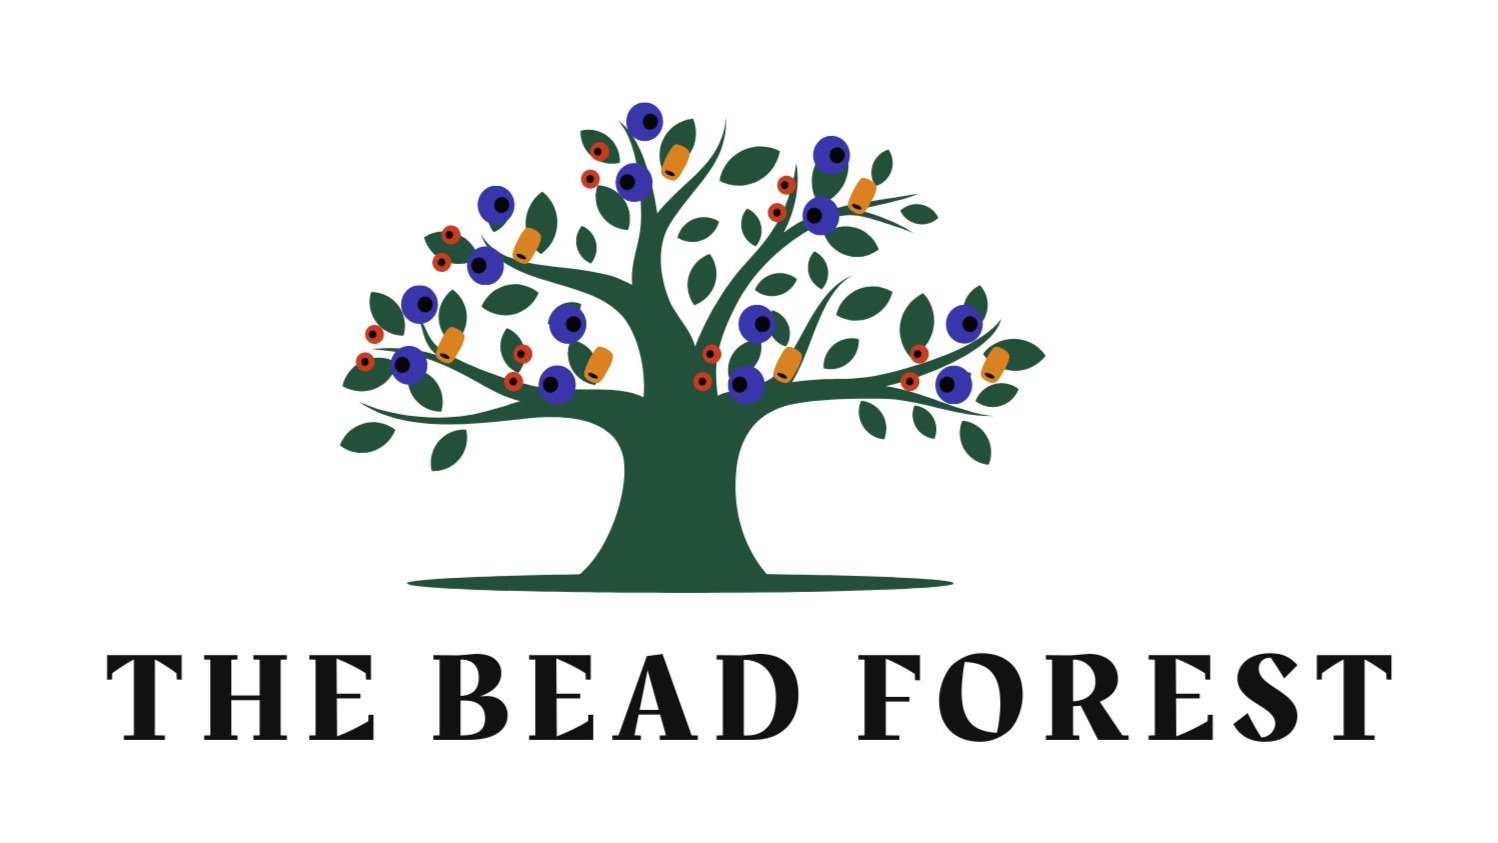 The Bead Forest